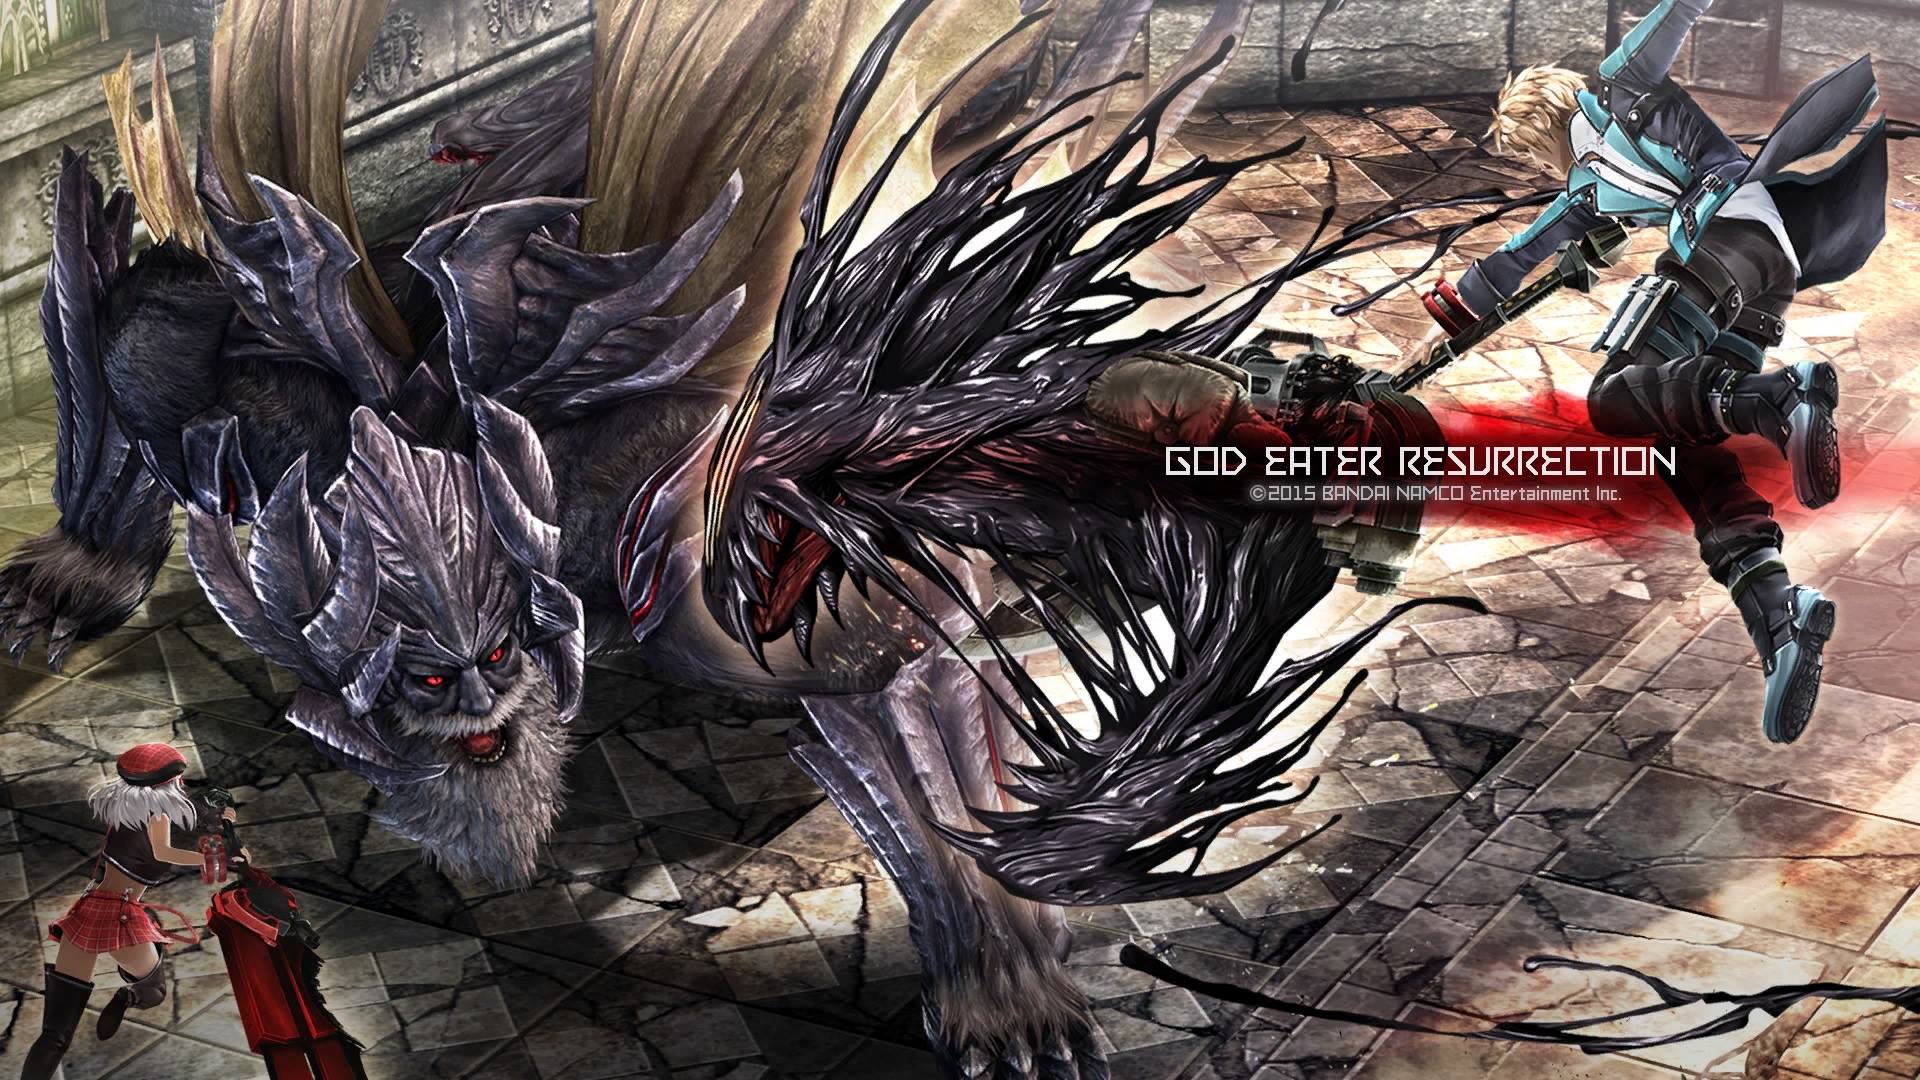 rom psp god eater 2 english patch